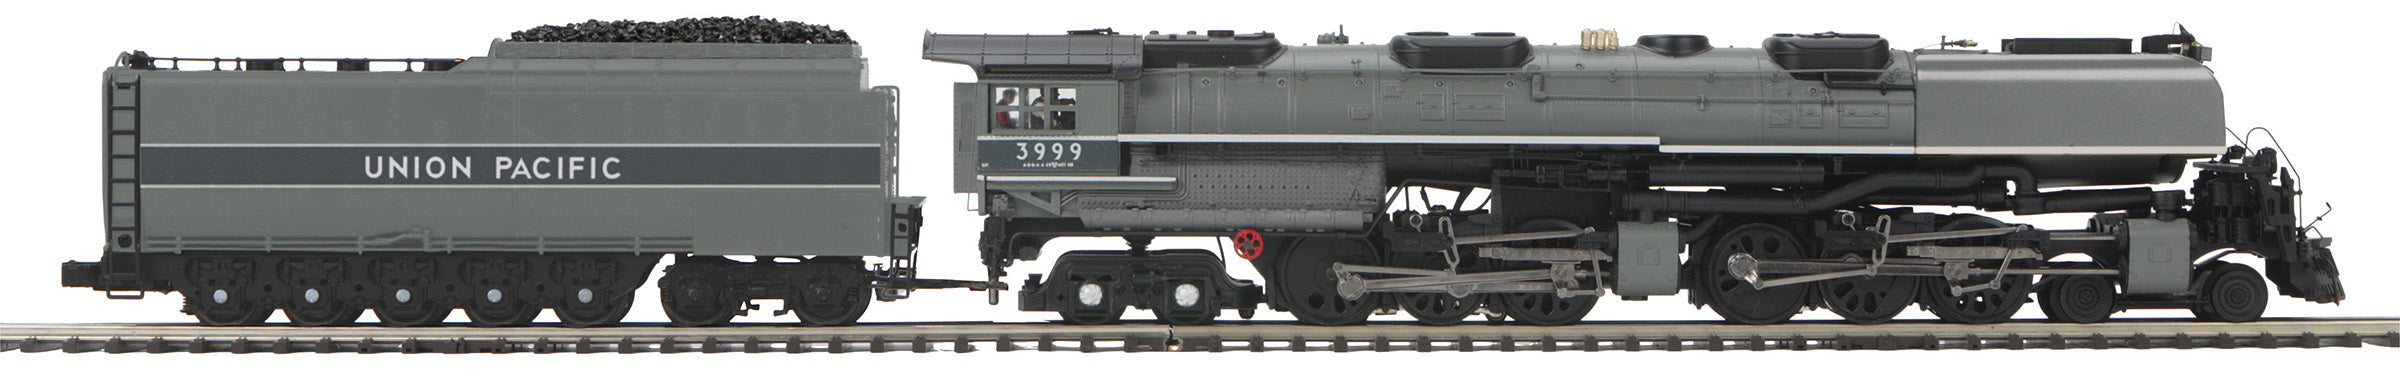 MTH 20-3893-1 - 4-6-6-4 Challenger Steam Engine "Union Pacific" #3999 w/ PS3 + Smoke Deflectors (Two-Tone Gray w/ Silver Stripes - Coal Tender)